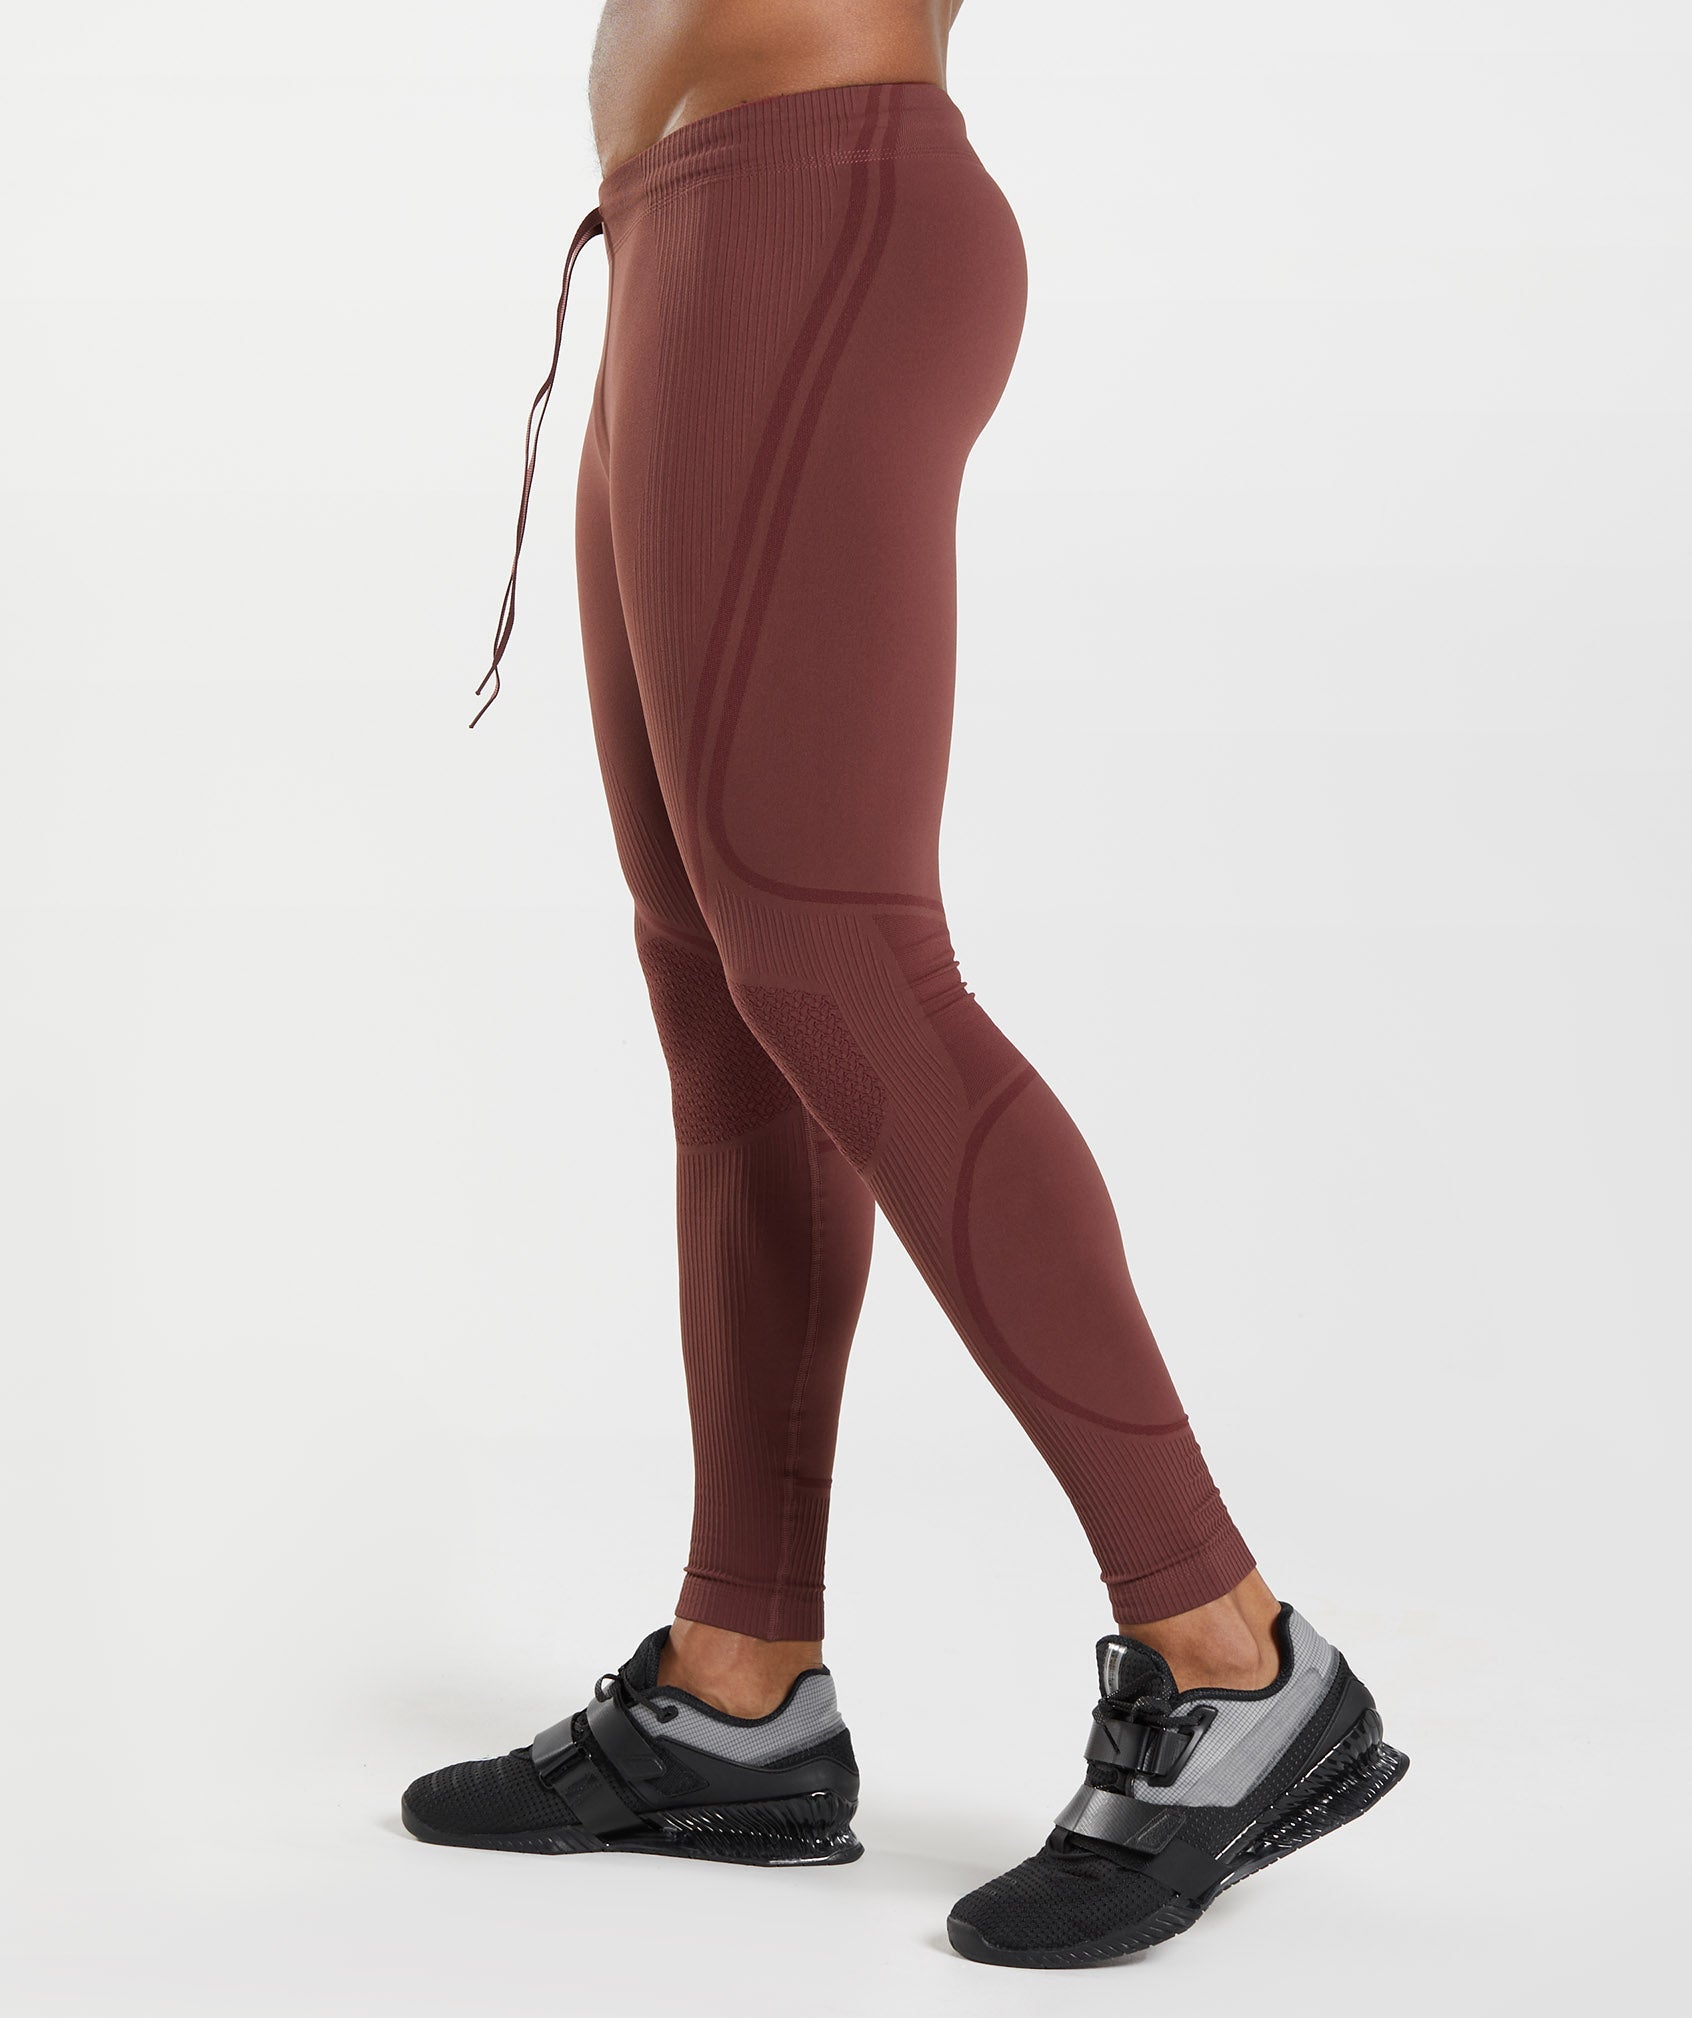 315 Seamless Tights in Cherry Brown/Athletic Maroon - view 3